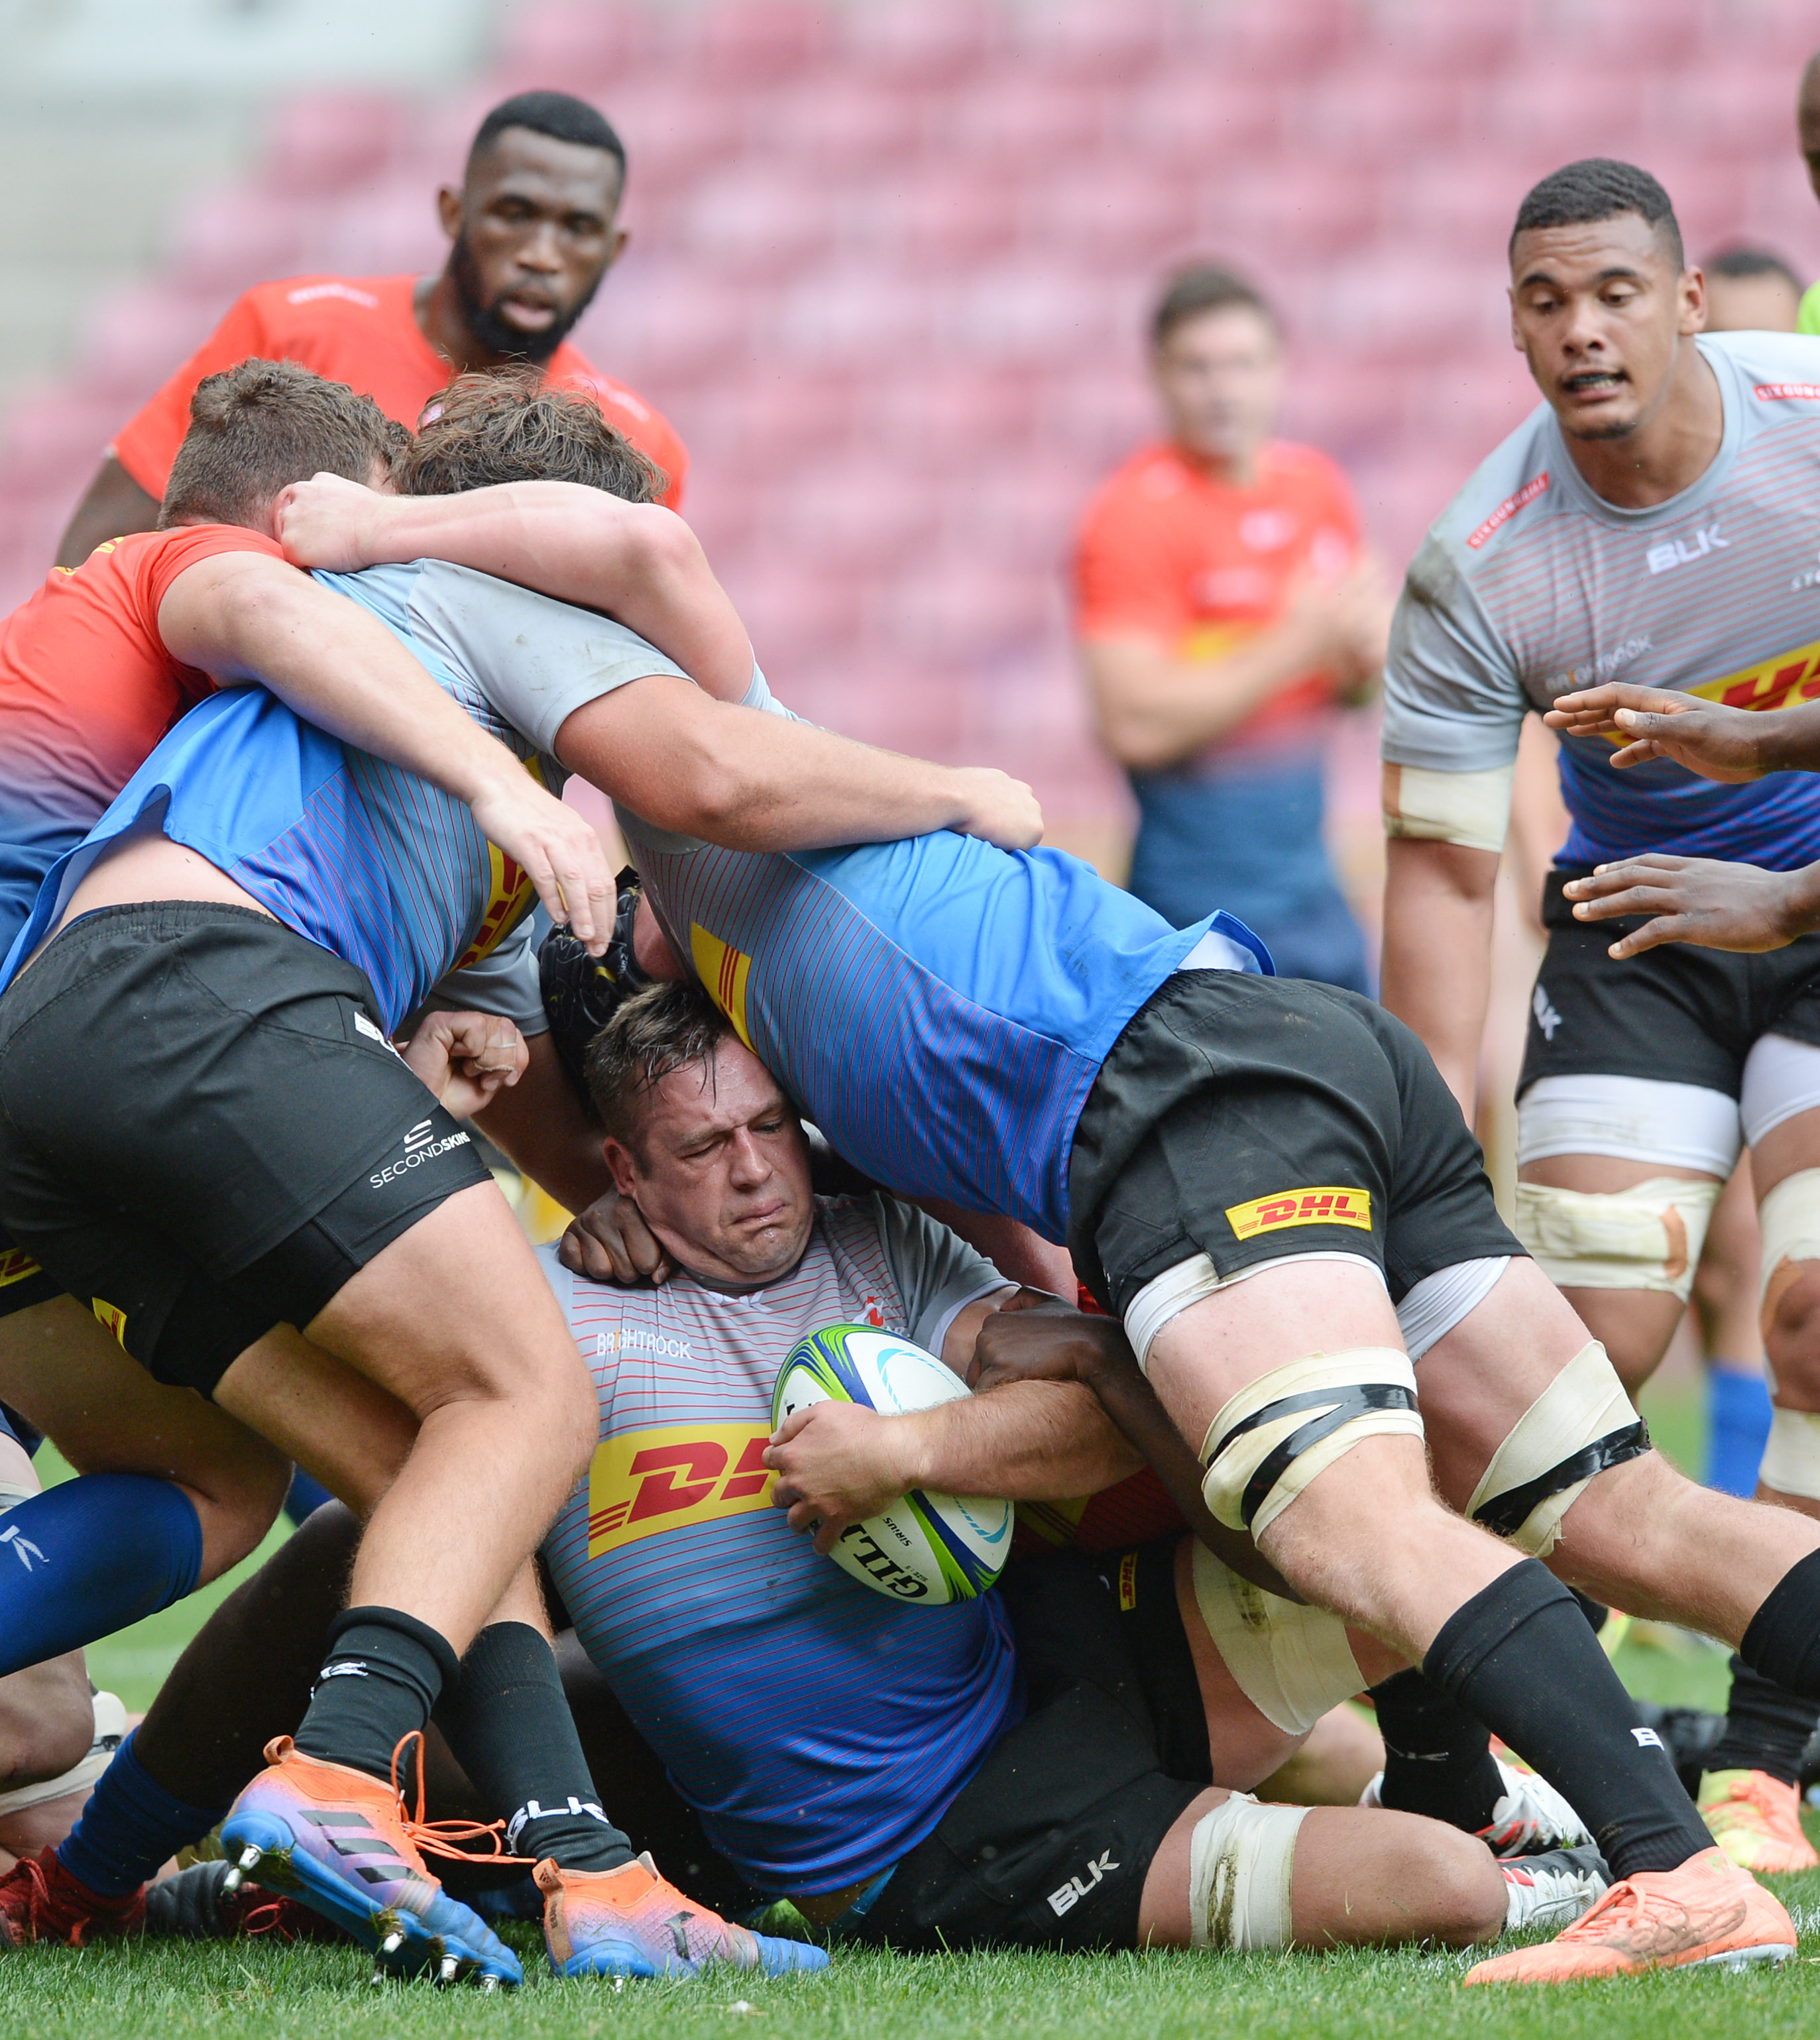 Chris van Zyl of the Penguins hangs onto the ball in a ruck during the Stormers friendly game between the Devils Peak Dassies (red) and the Boulders Beach Penguins (blue) at Newlands Rugby Stadium in Cape Town on 18 September 2020 © Ryan Willkisky/BackpagePix